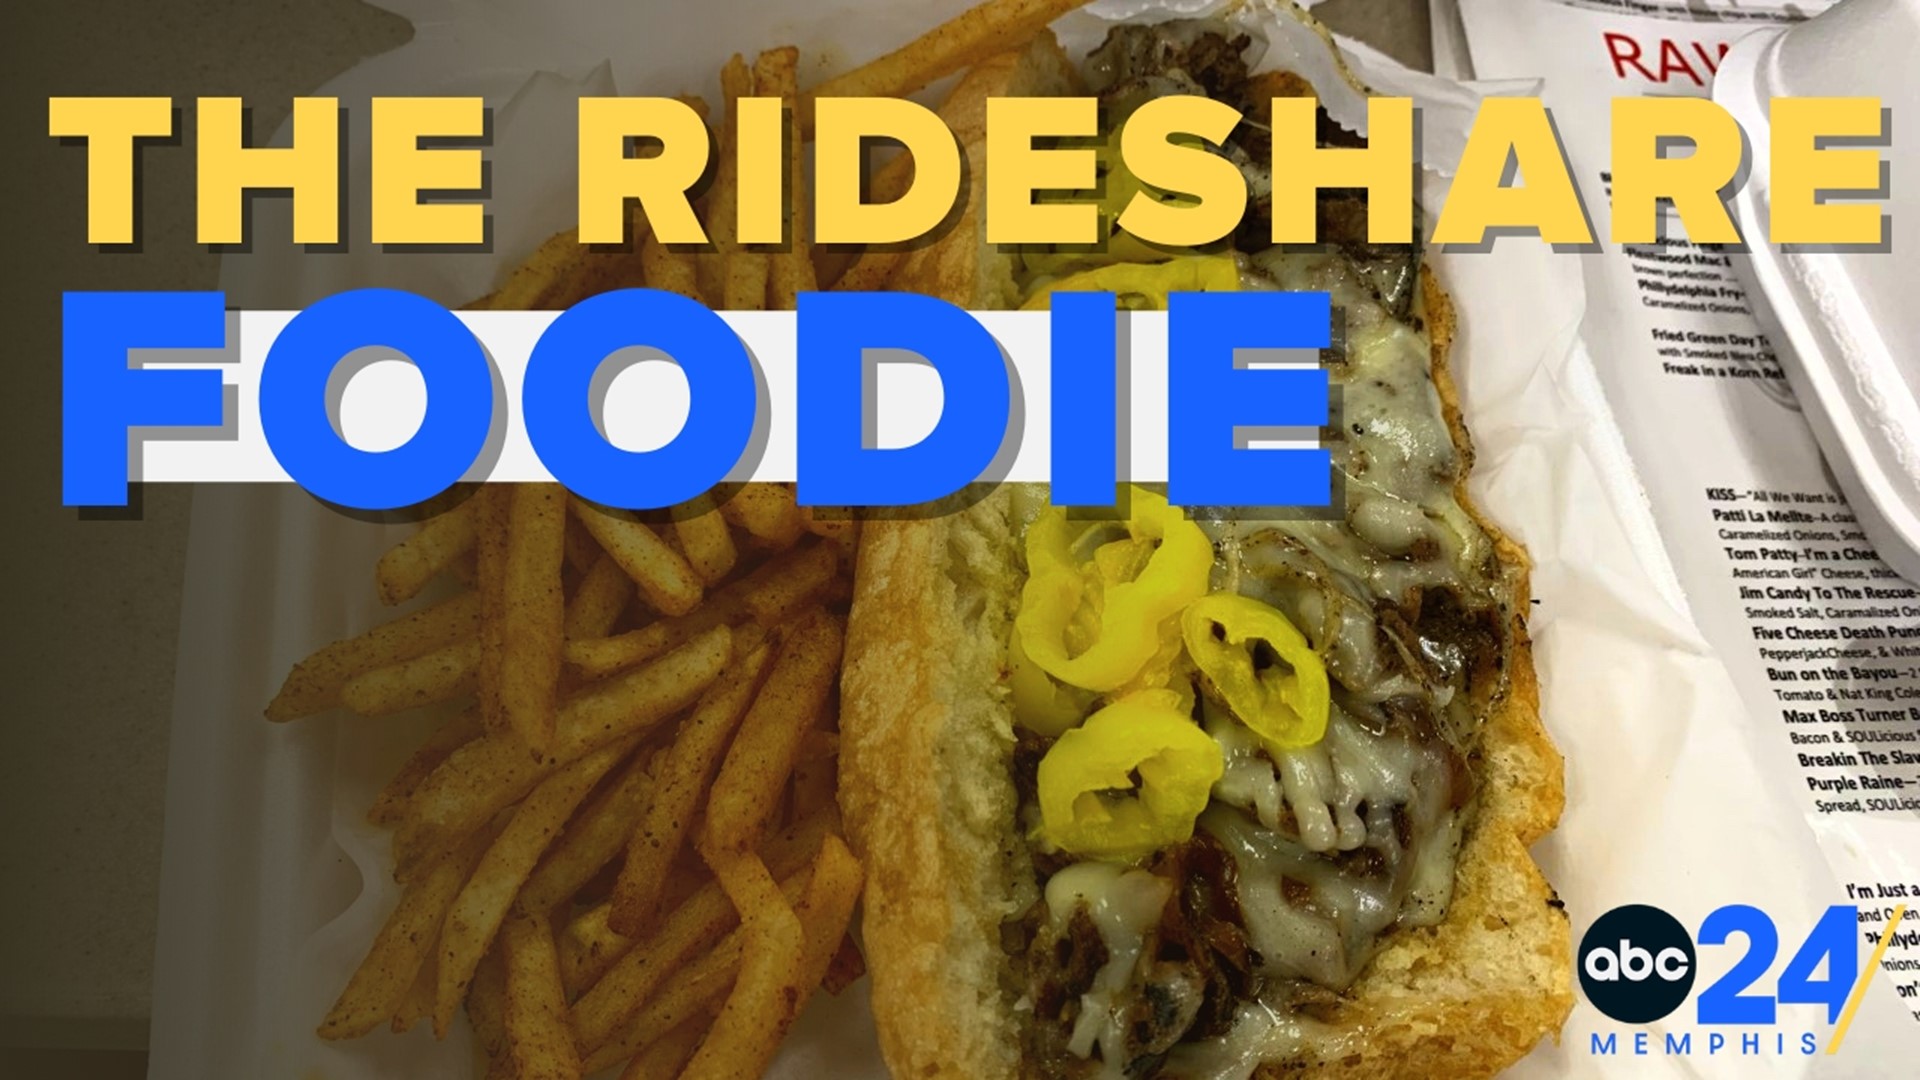 Kreskin Torres, better known as the Rideshare Foodie, is on a mission to find the best local eateries in all 50 states.